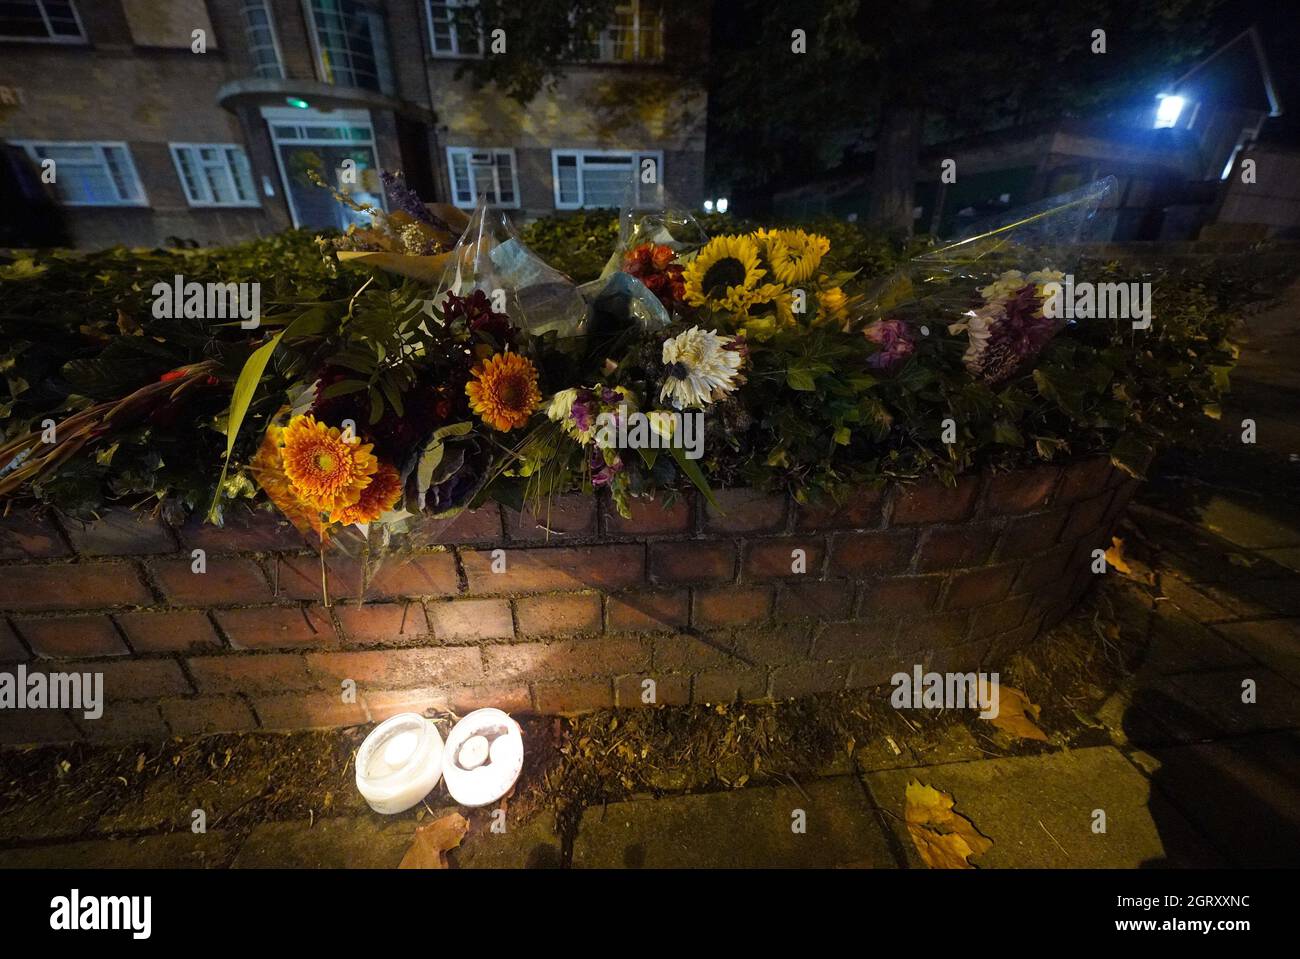 Floral tributes to Sarah Everard are left on Poynders Road in Clapham, south London, close to where Sarah Everard was abducted from the street by being falsely arrested by police officer Wayne Couzens in March. Picture date: Friday October 1, 2021. Stock Photo